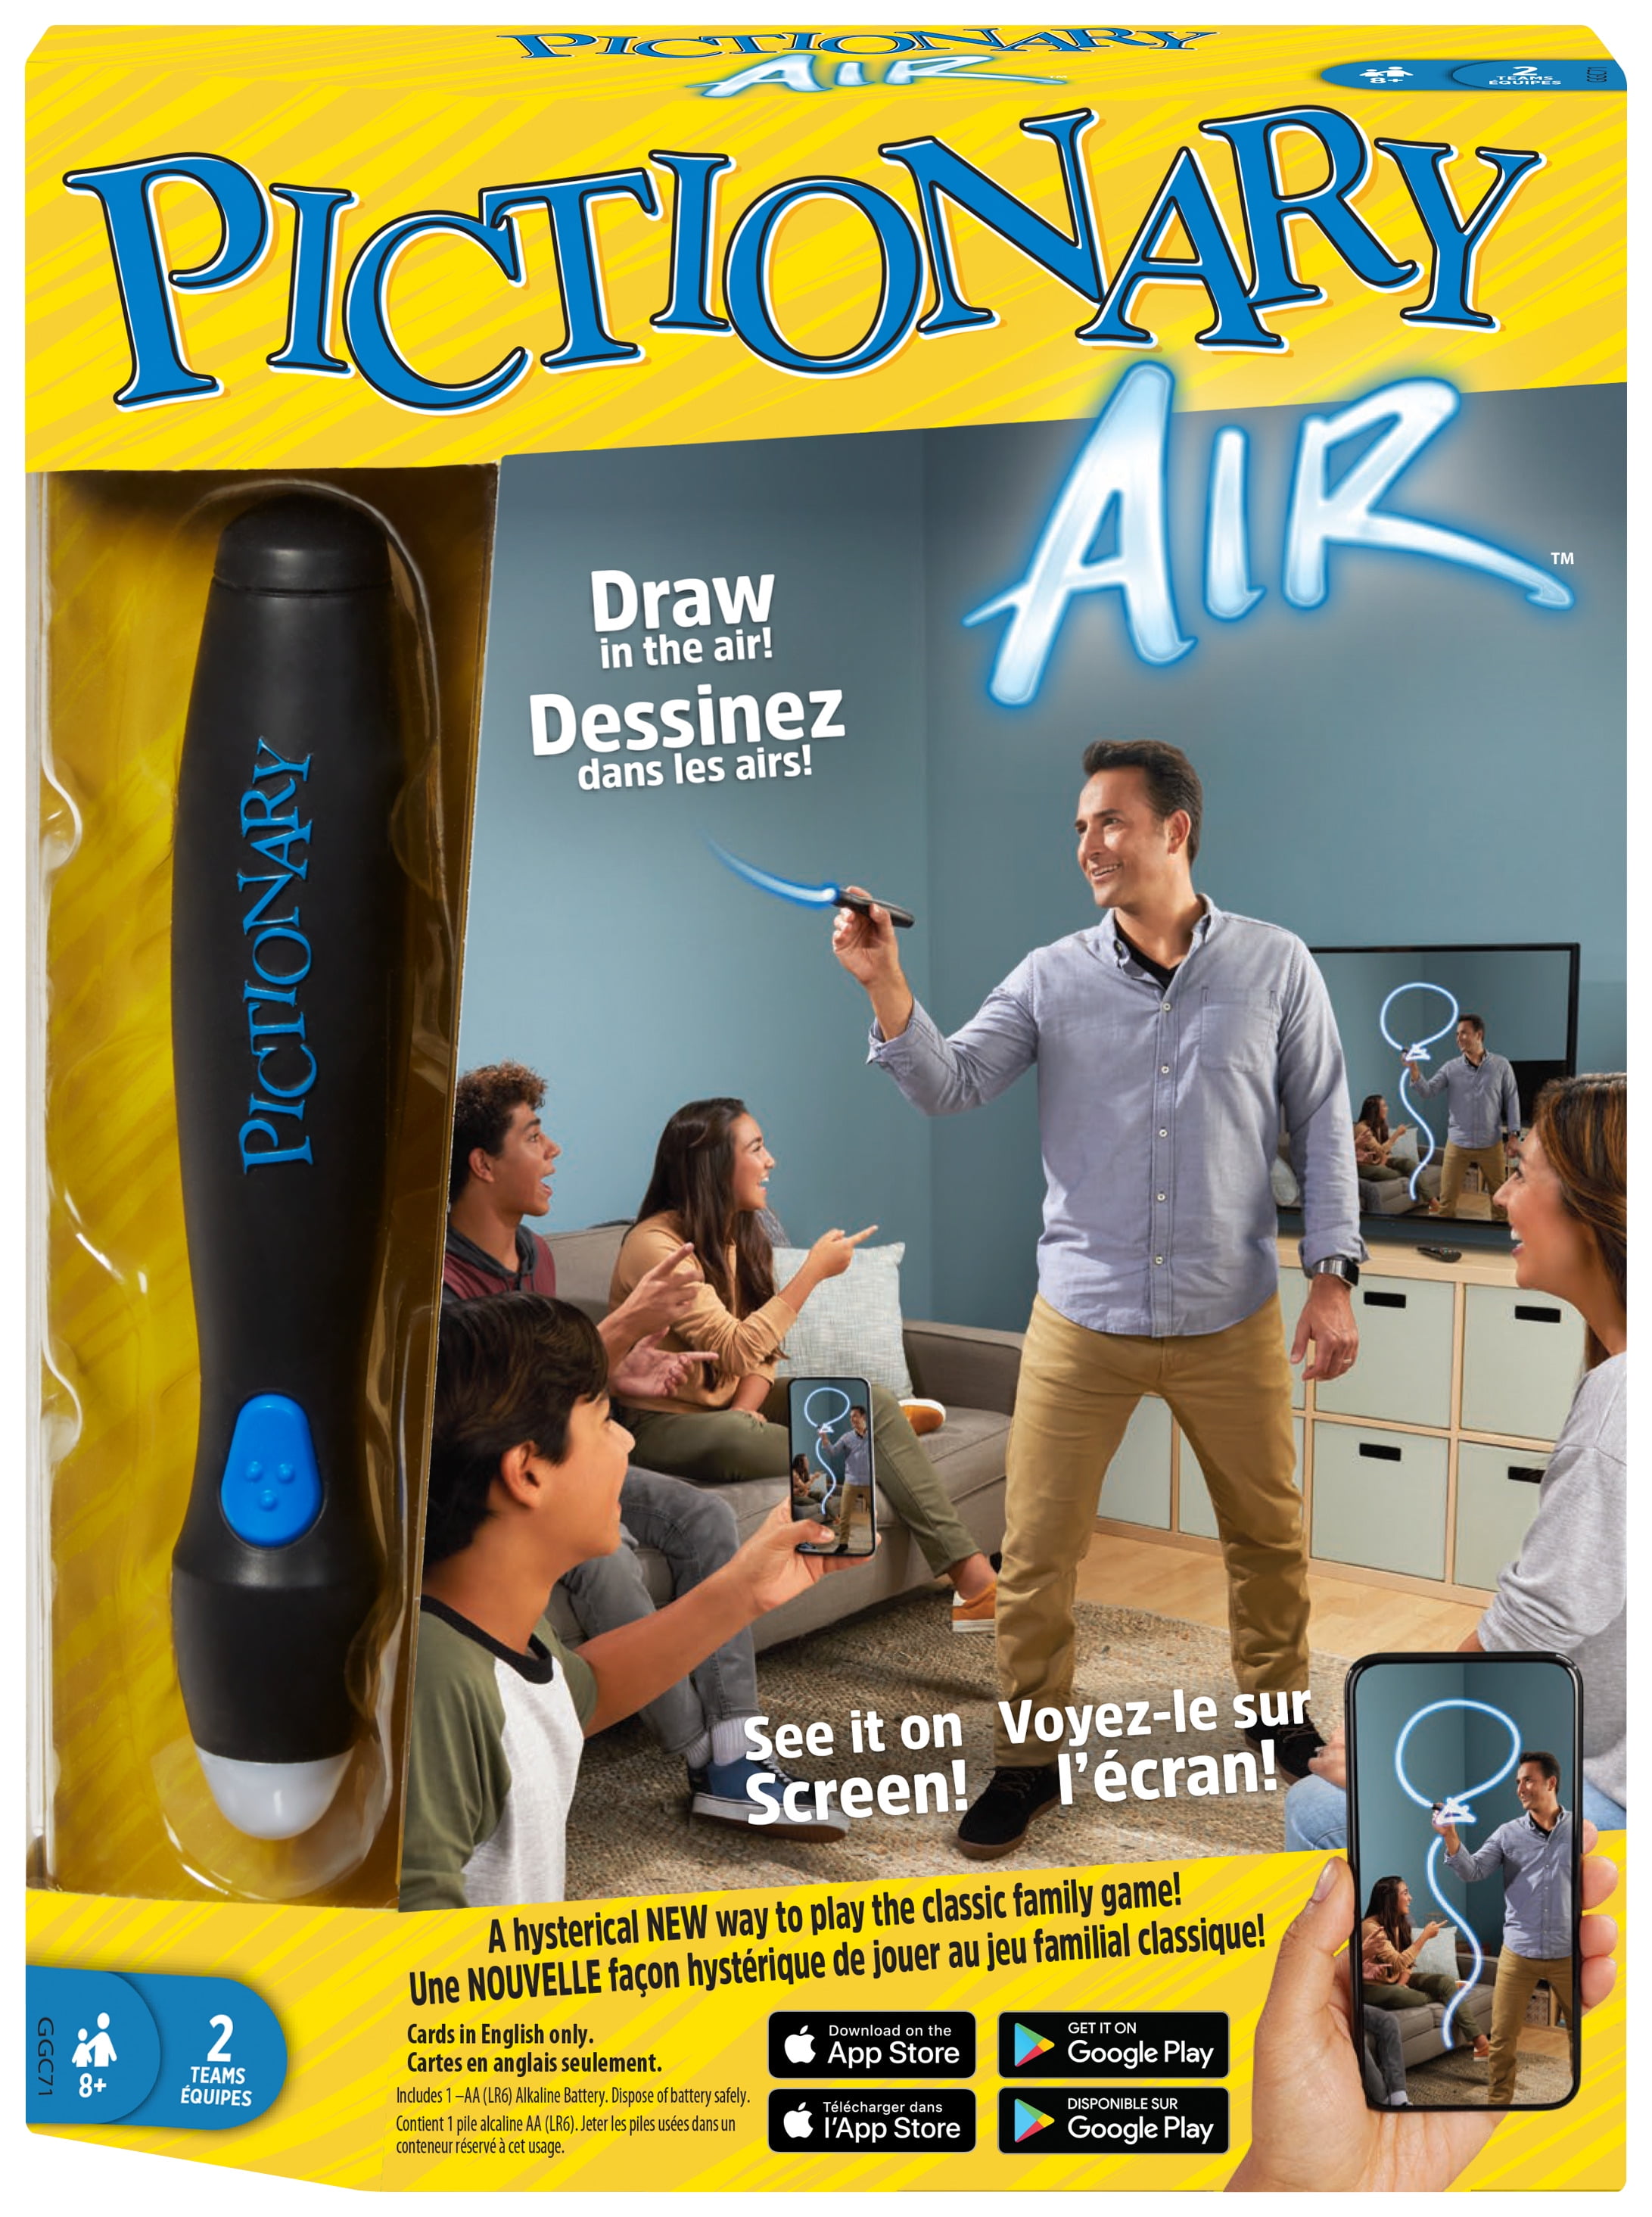 Pictionary Air Kids Vs Adults Family Game